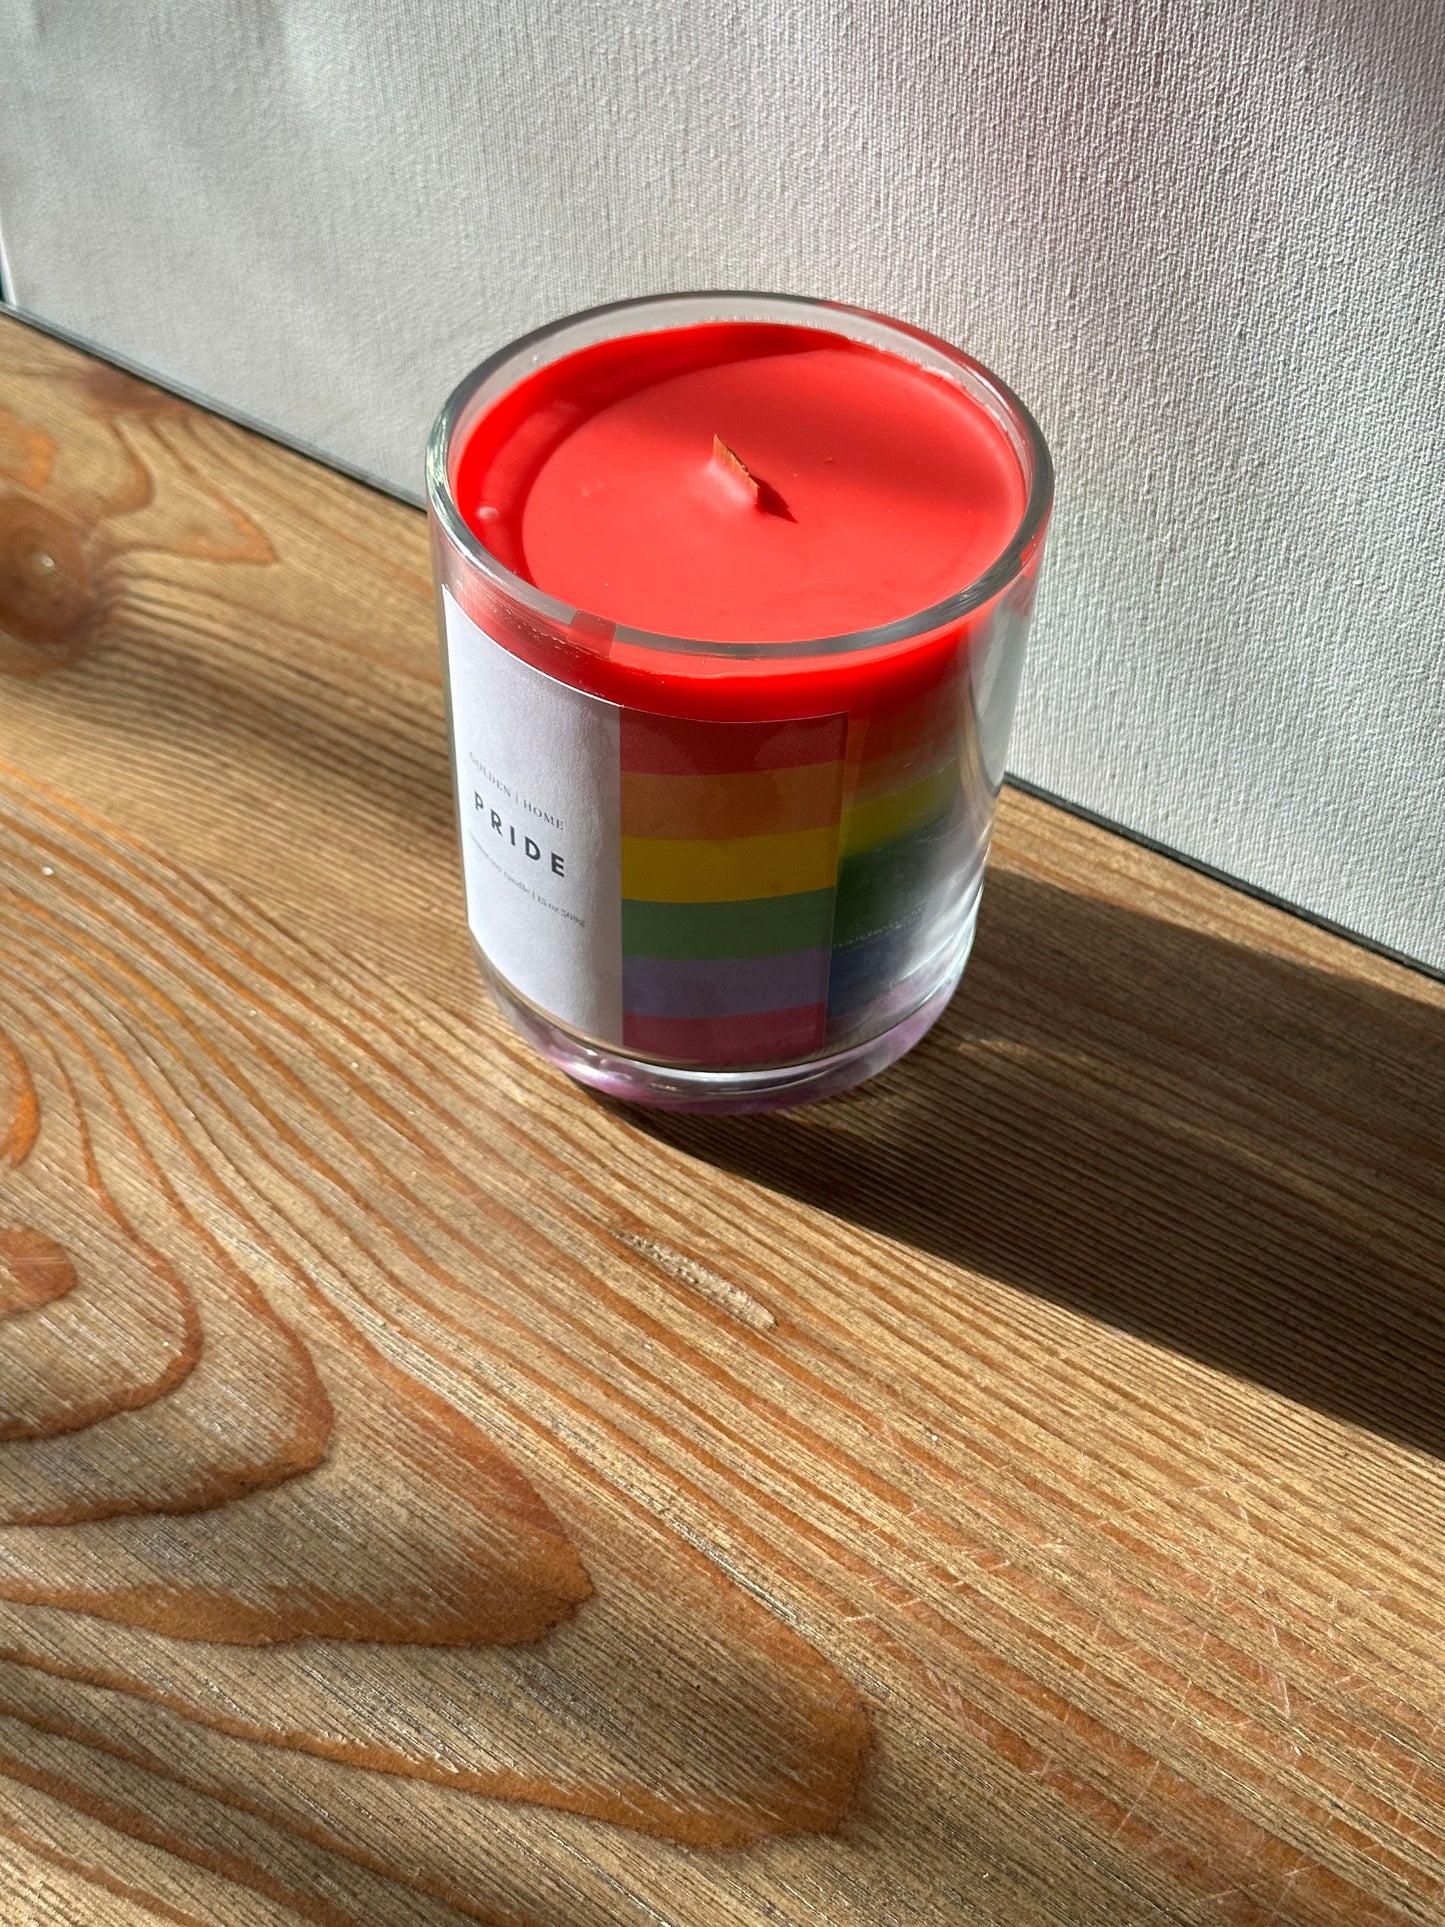 pride candle